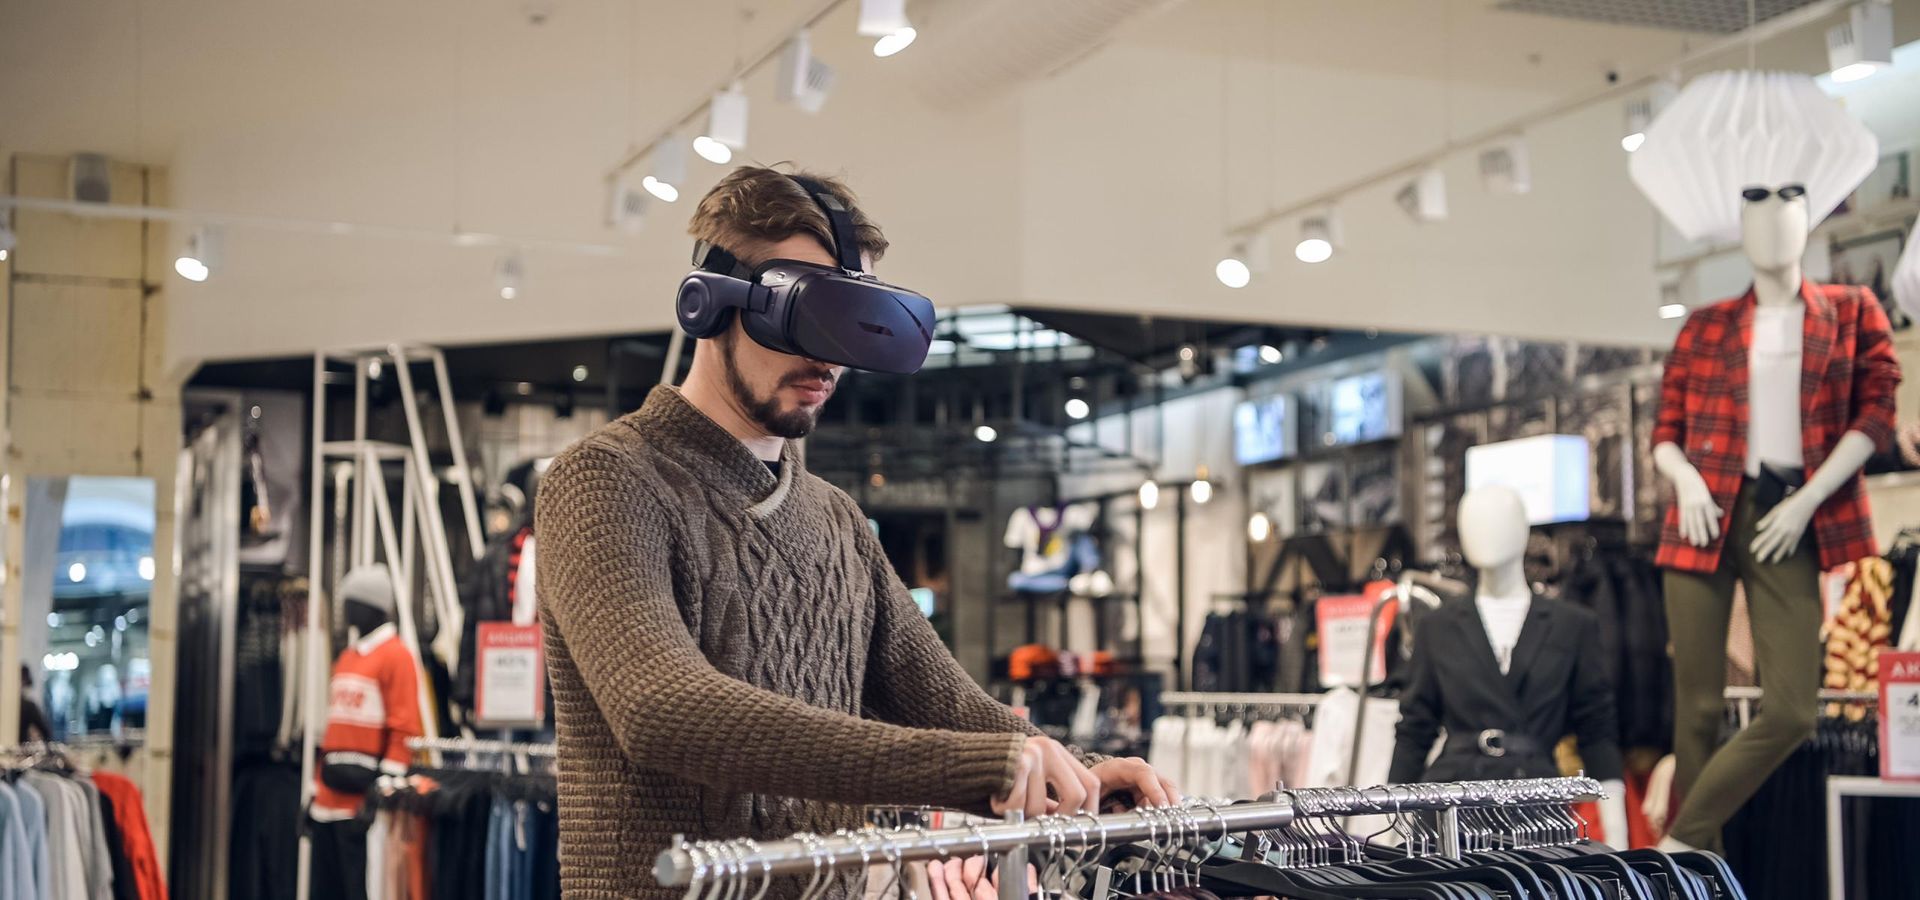 Virtual reality in retail:
11 use cases, benefits, and adoption practices